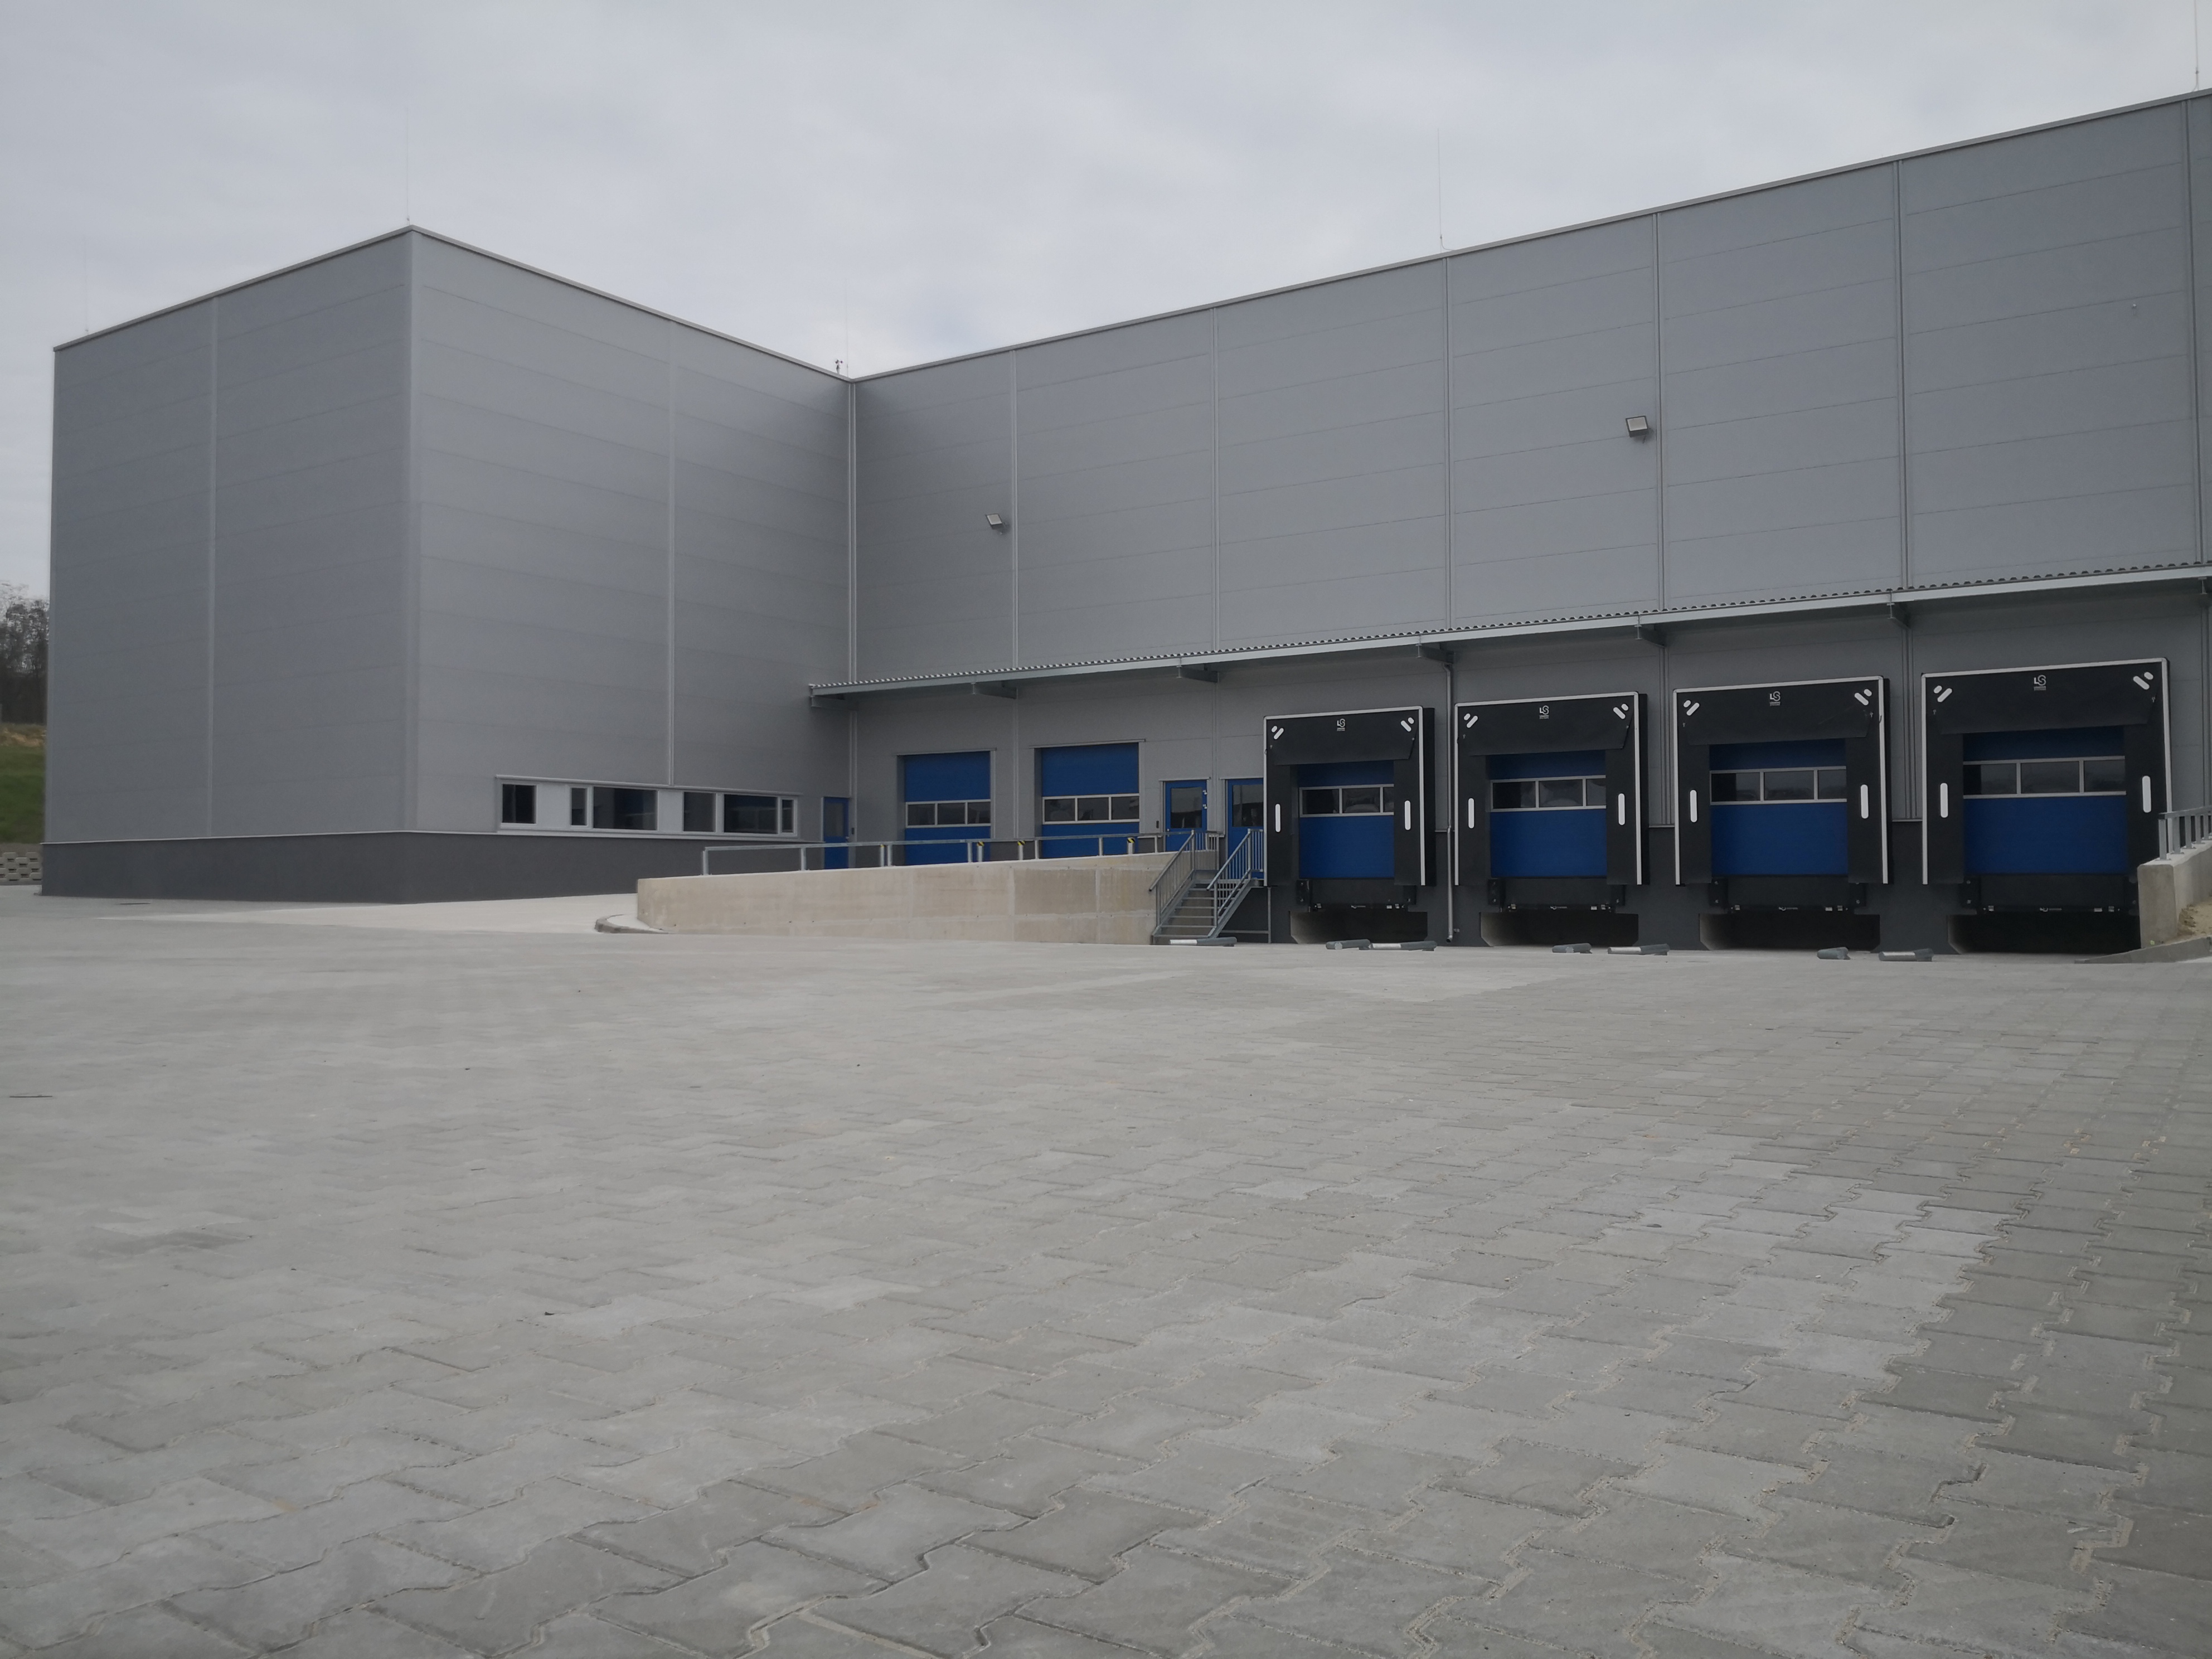 Warehouse at Biatorbágy delivered ahead of schedule